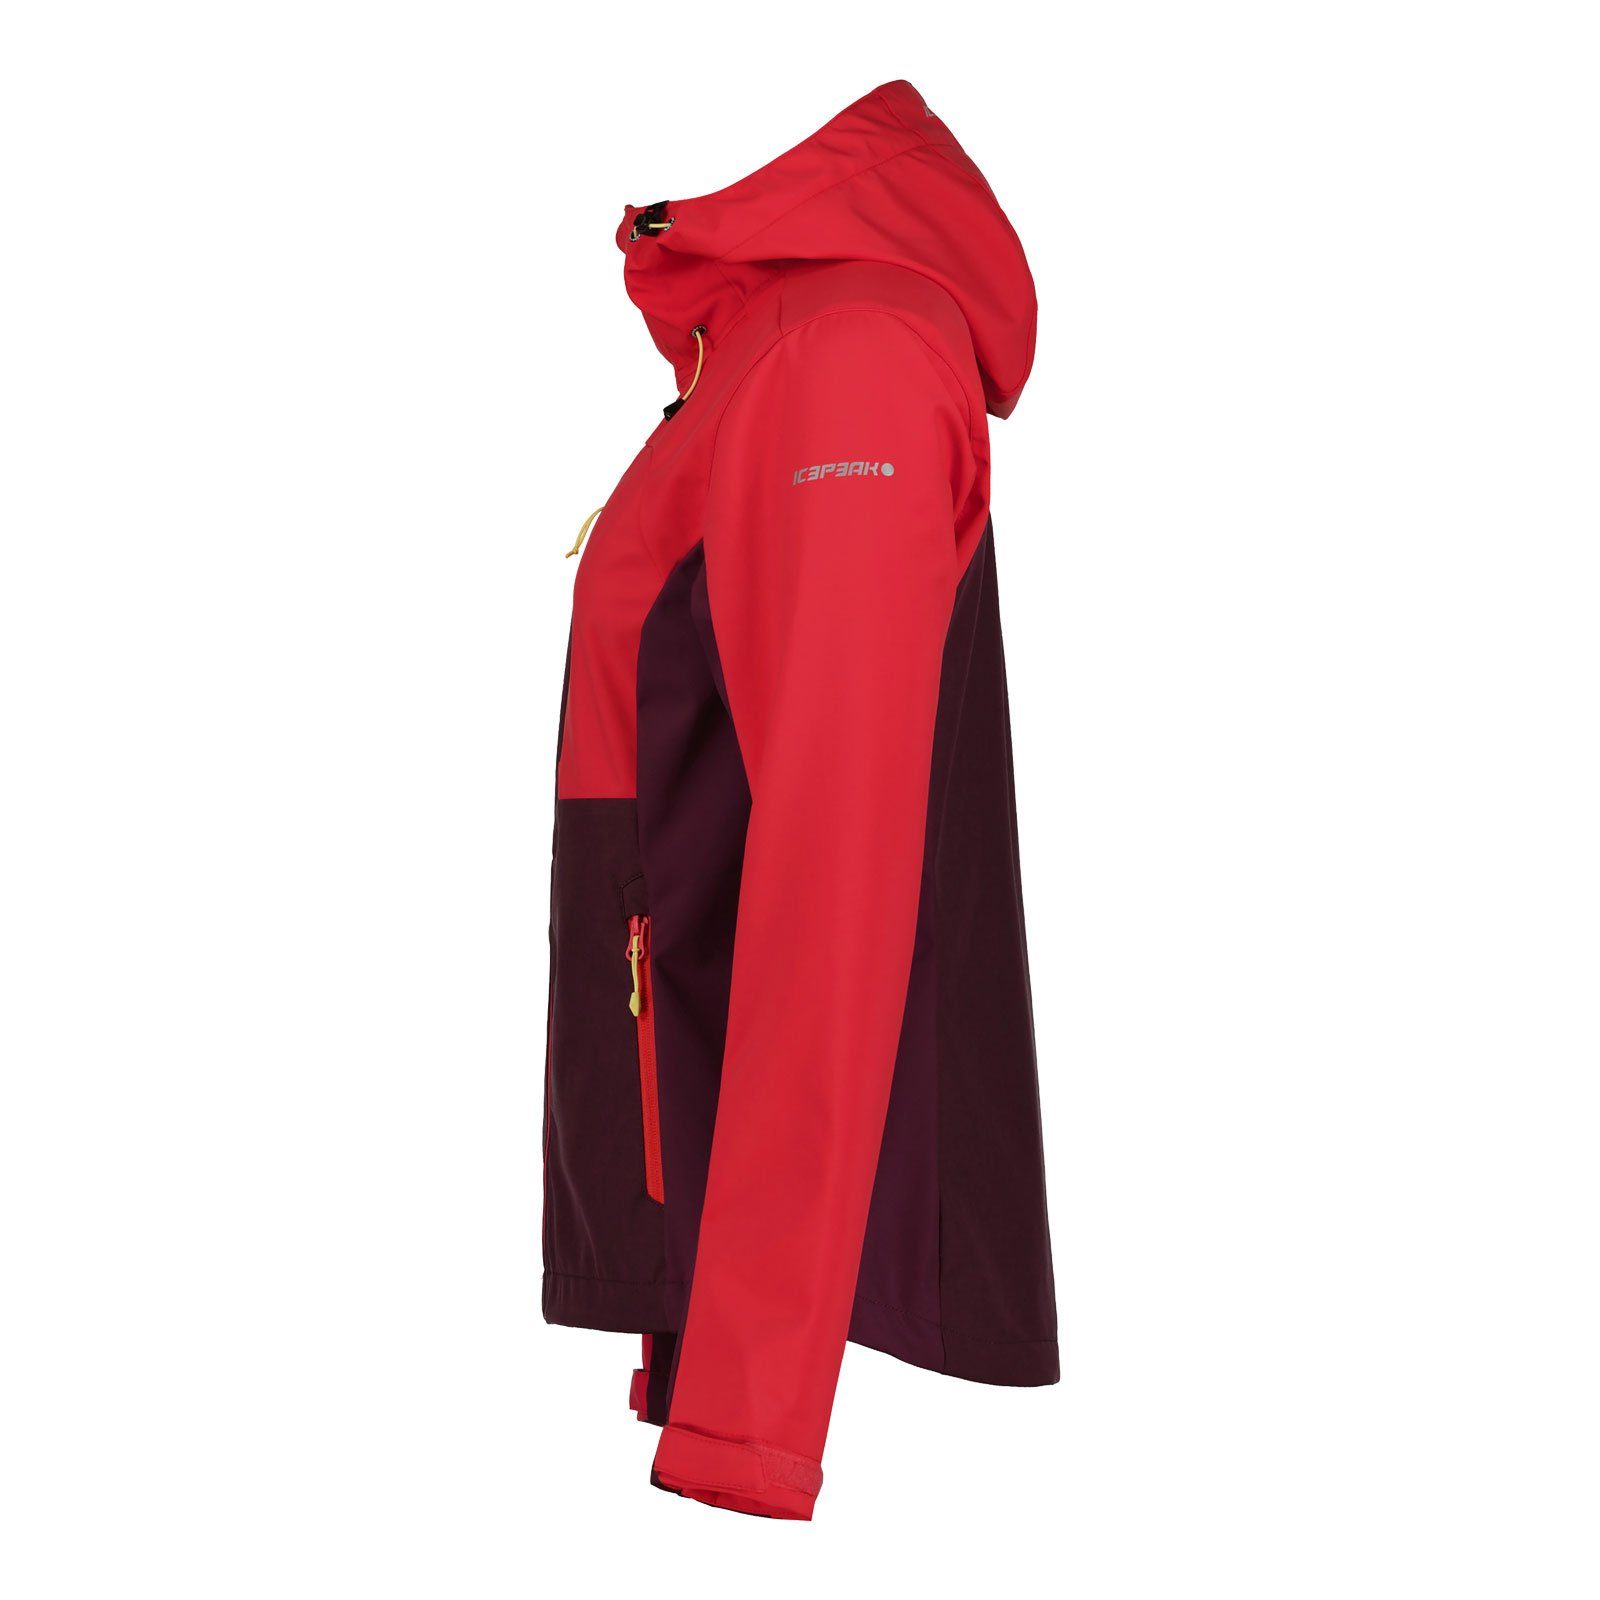 Icepeak Wear A.W.S. Broadus 643 Active - coral red mit / Softshelljacke System Active